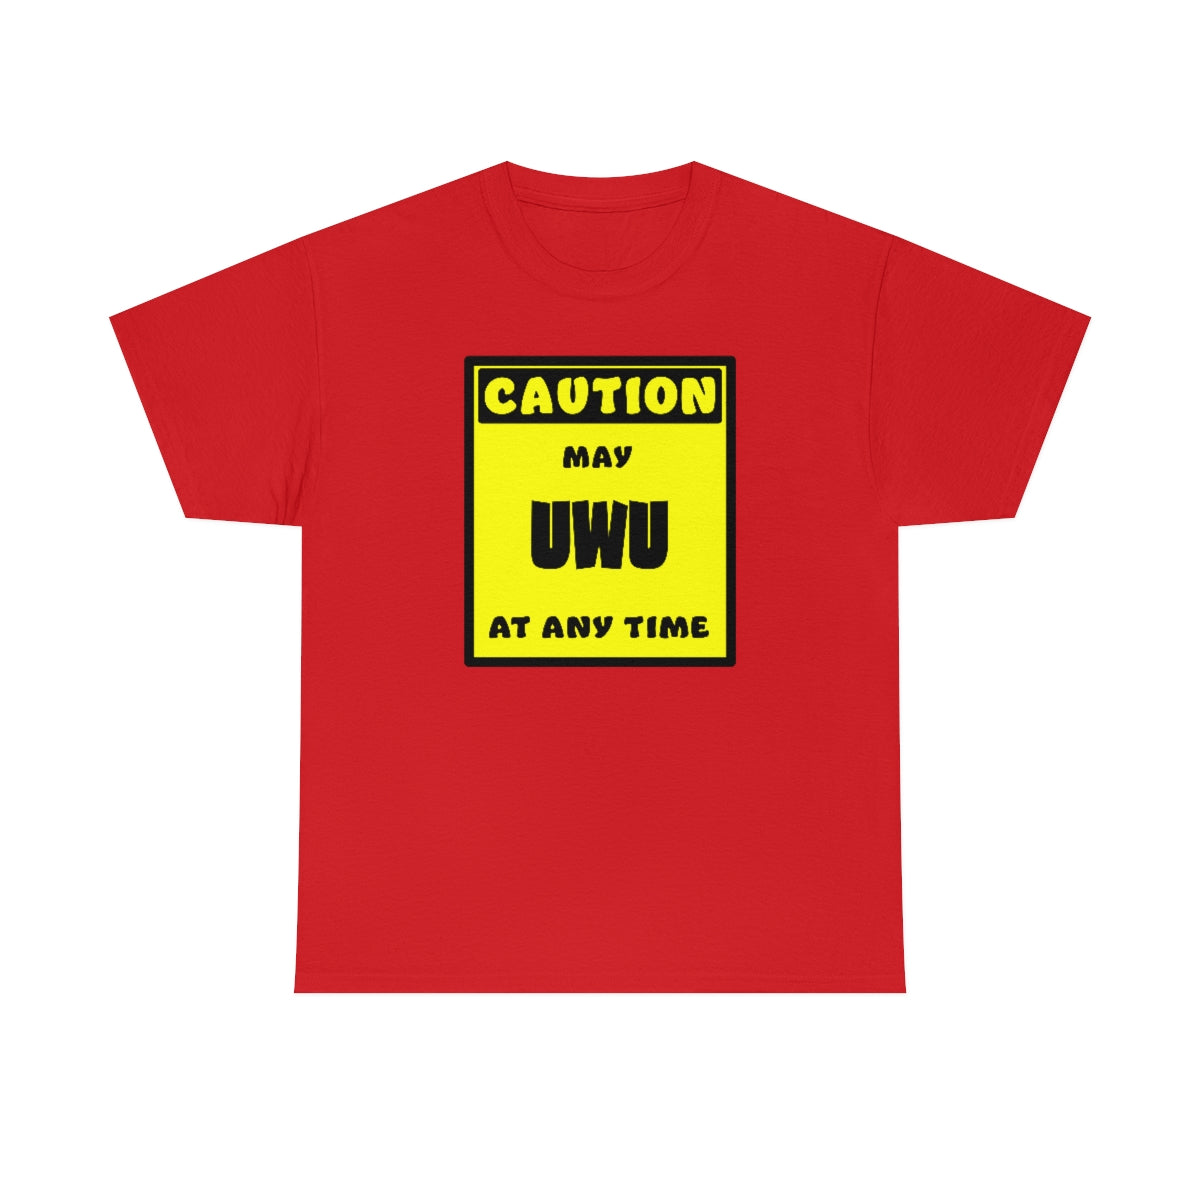 CAUTION! May UWU at any time! - T-Shirt T-Shirt AFLT-Whootorca Red S 